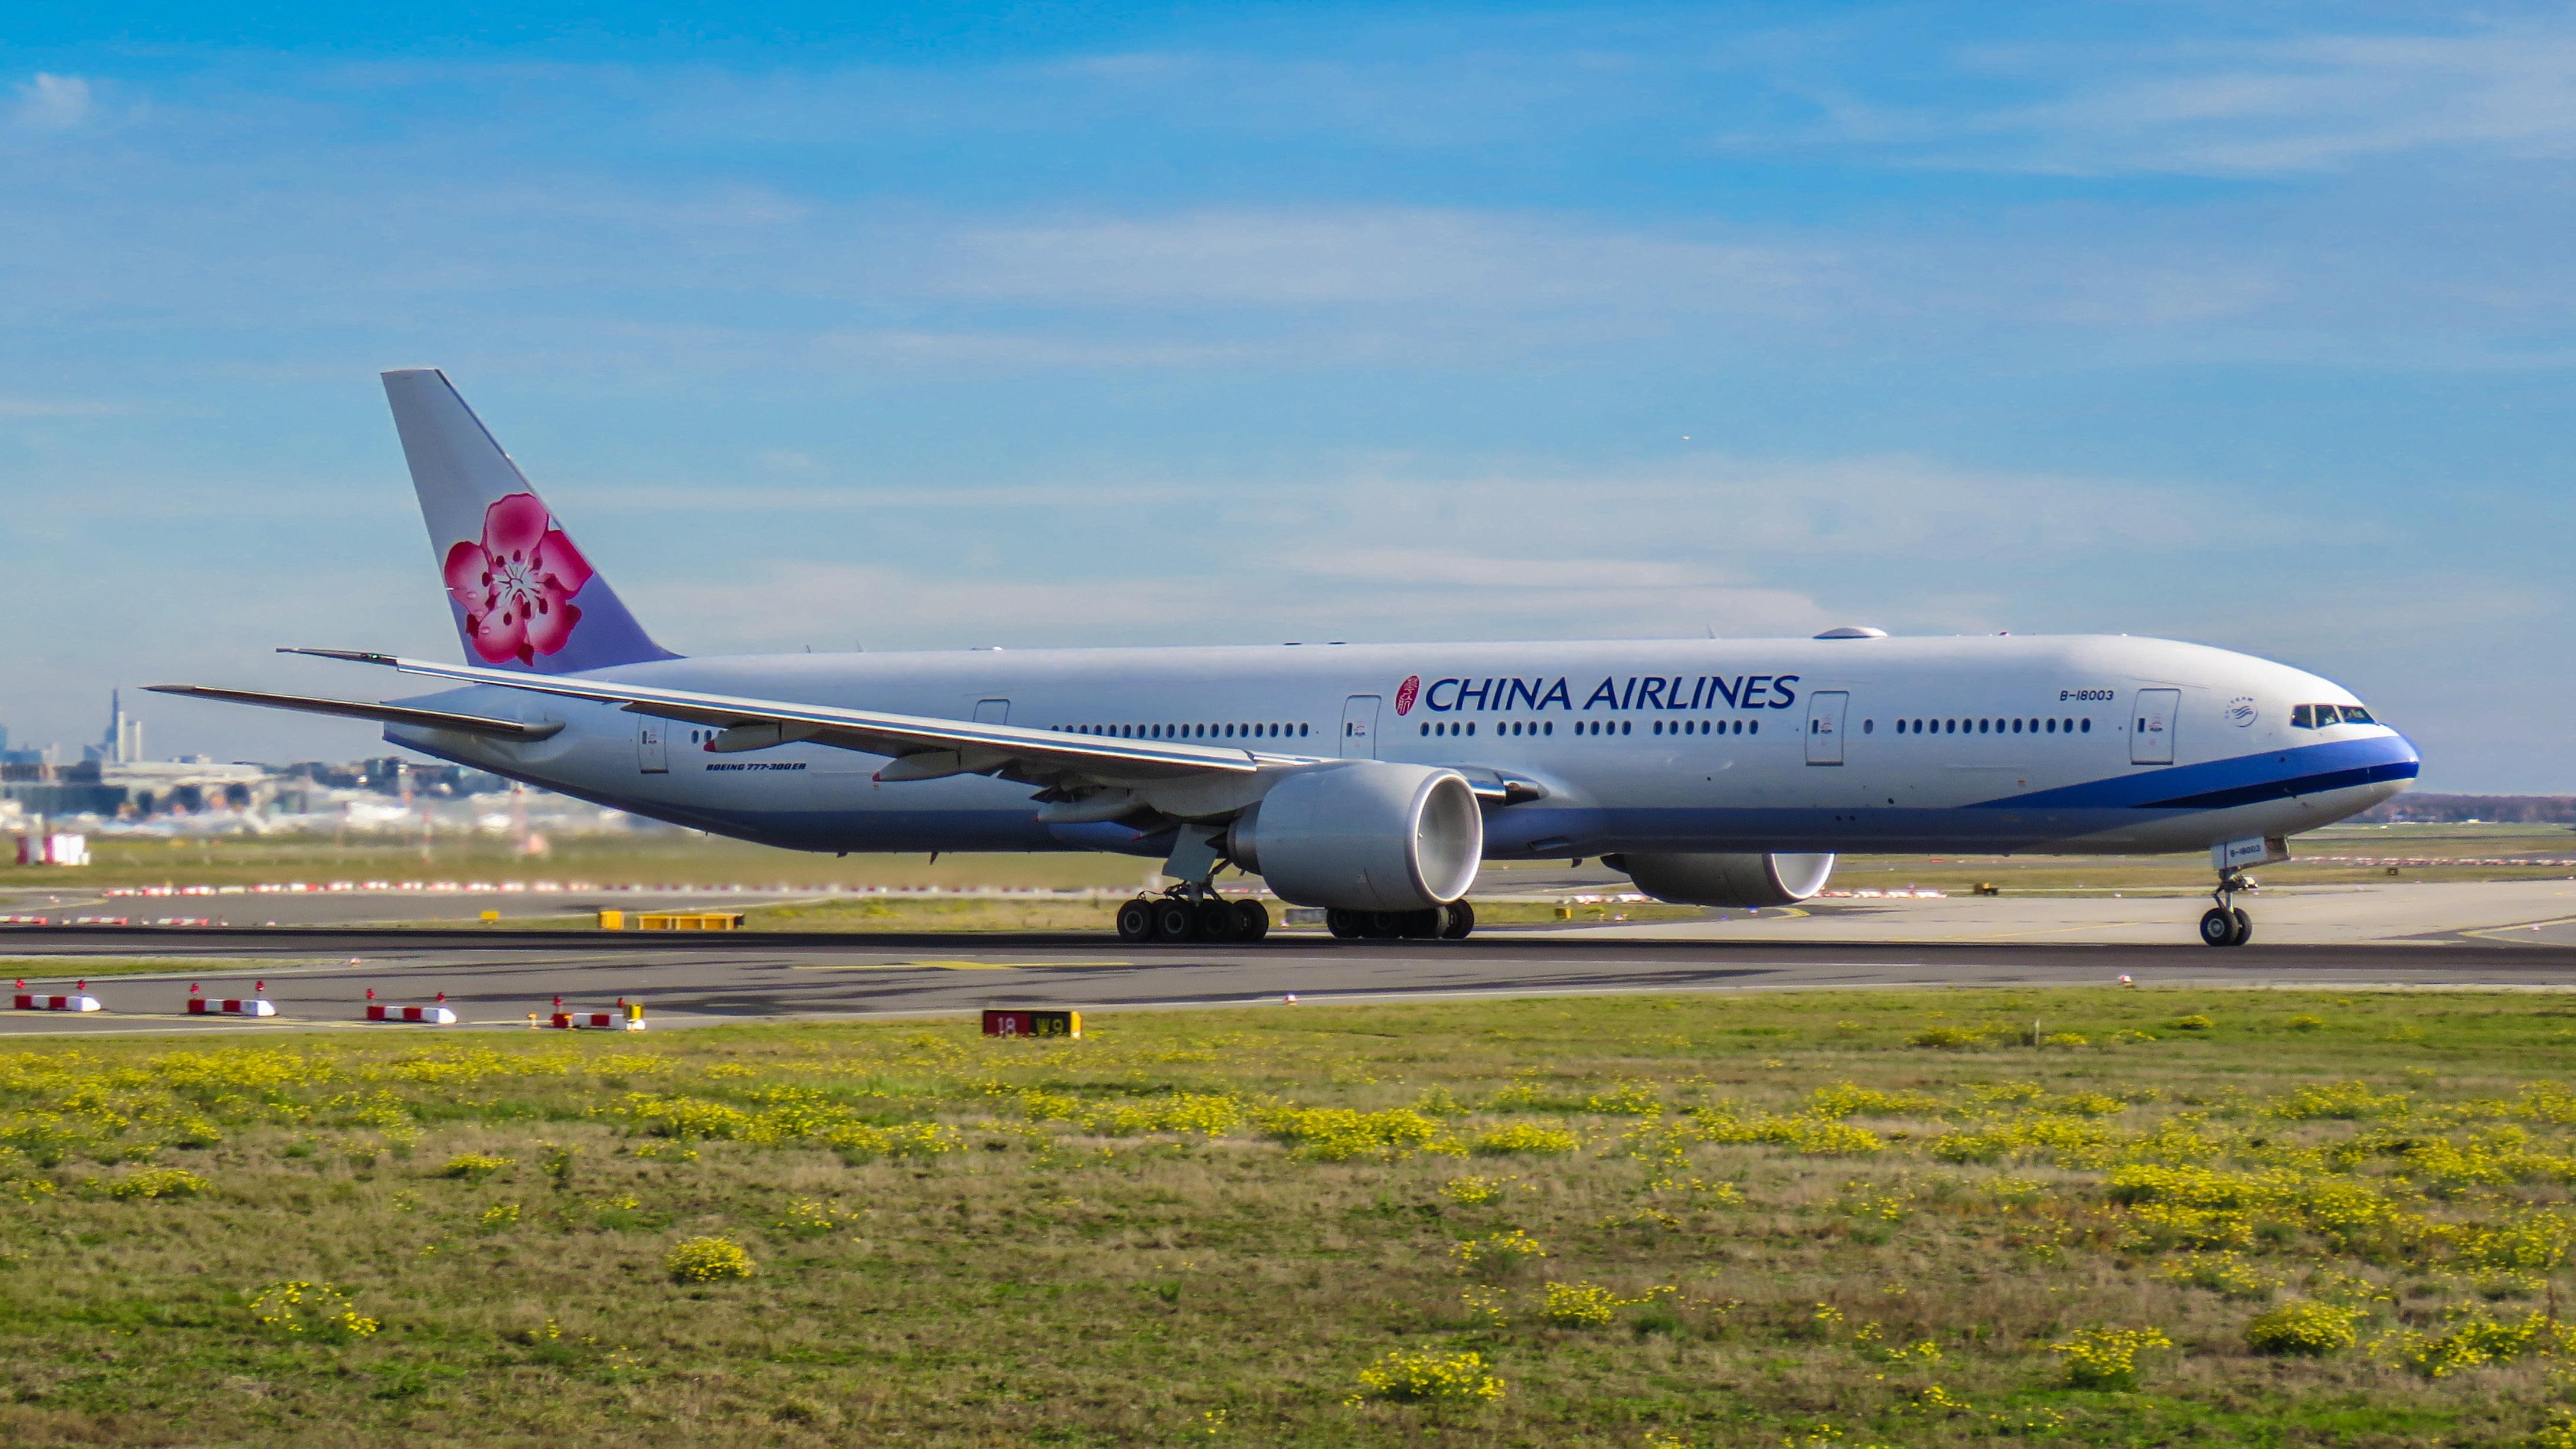 China Airlines B777-300ER.